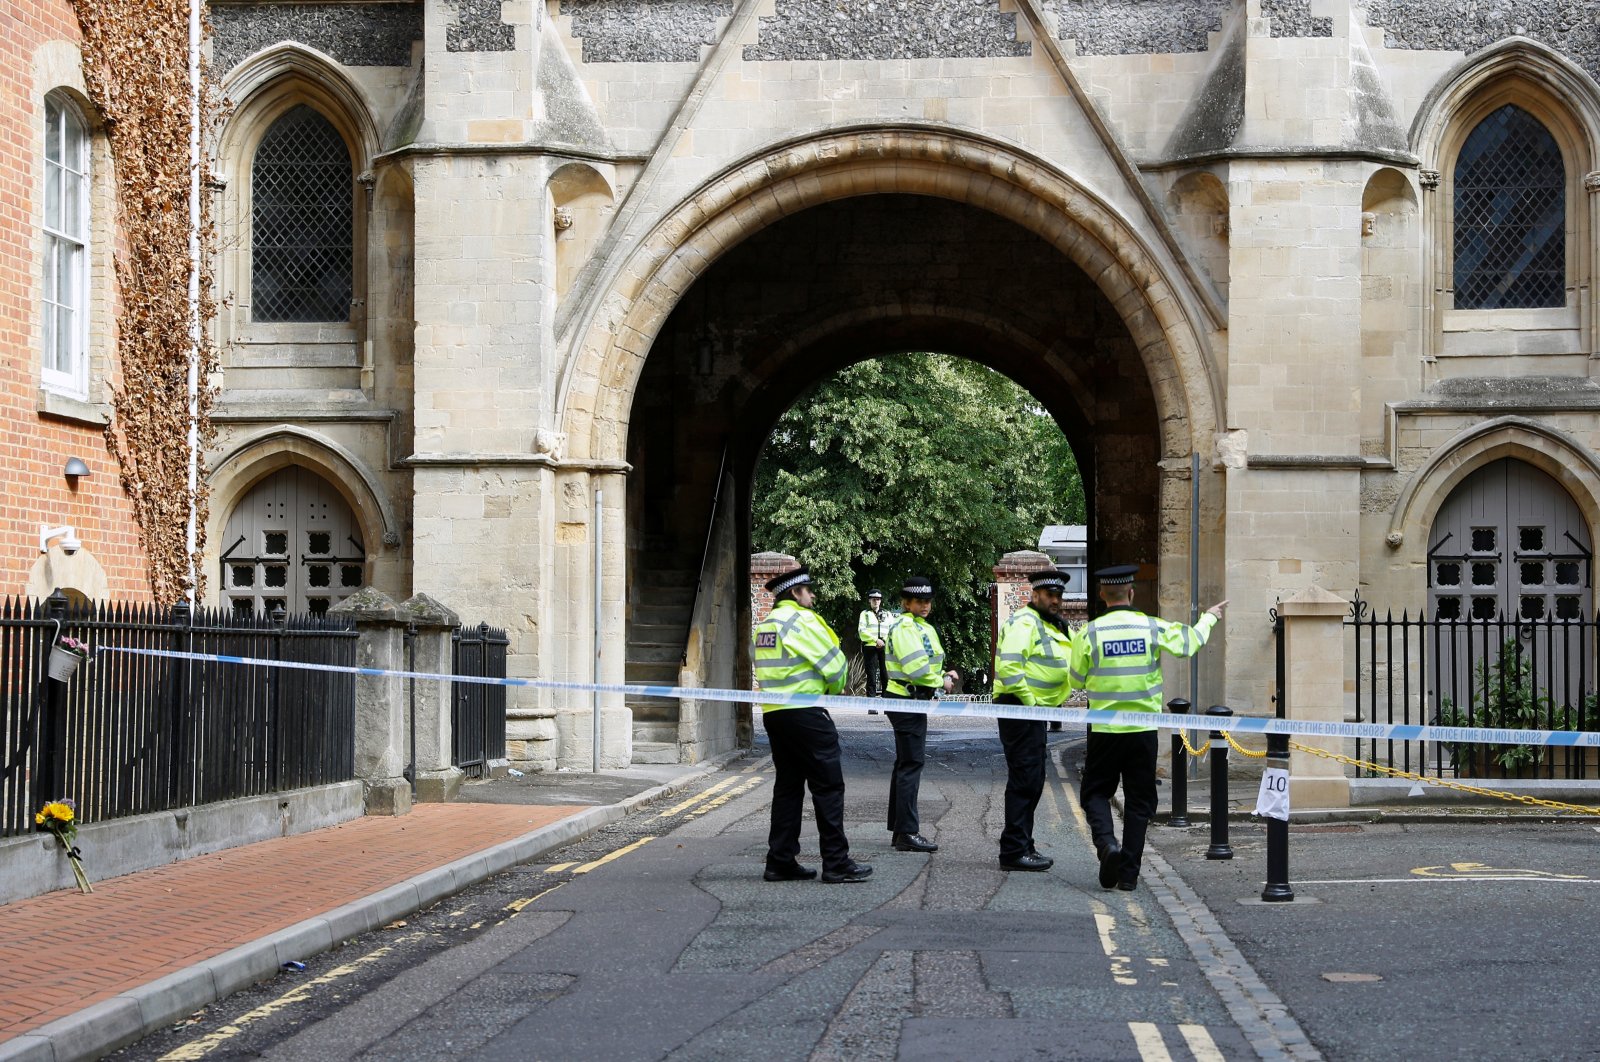 Police officers stand behind the cordon at the scene of multiple stabbings, Reading, England, June 21, 2020. (Reuters Photo)